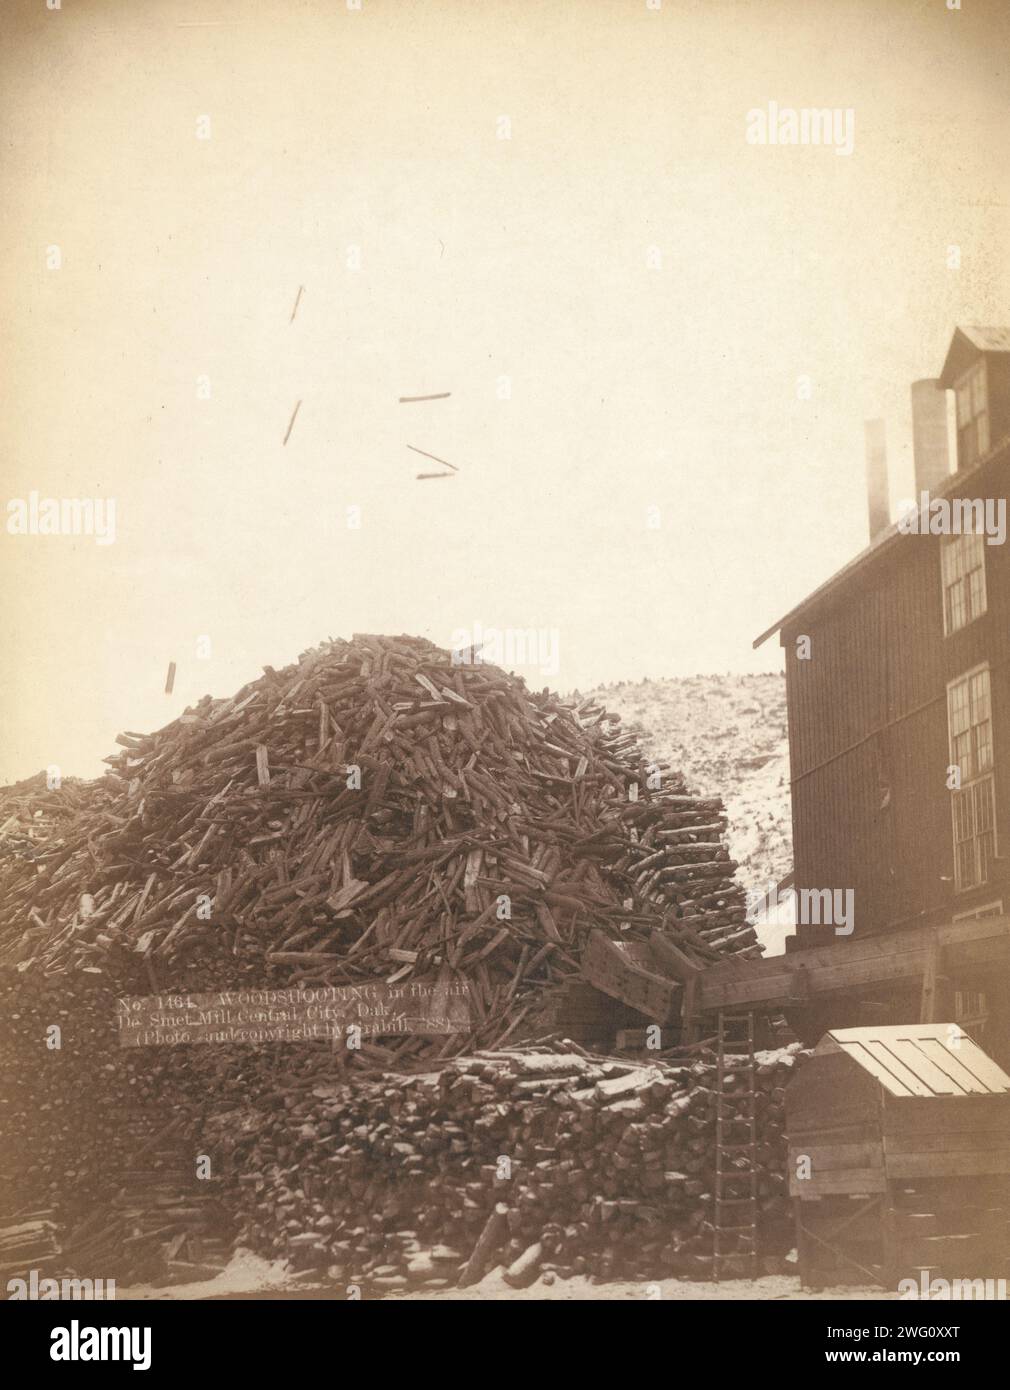 Wood shooting in the air, De Smet Mill, Center City, Dak, 1888. Large pile of timber next to a building. Stock Photo